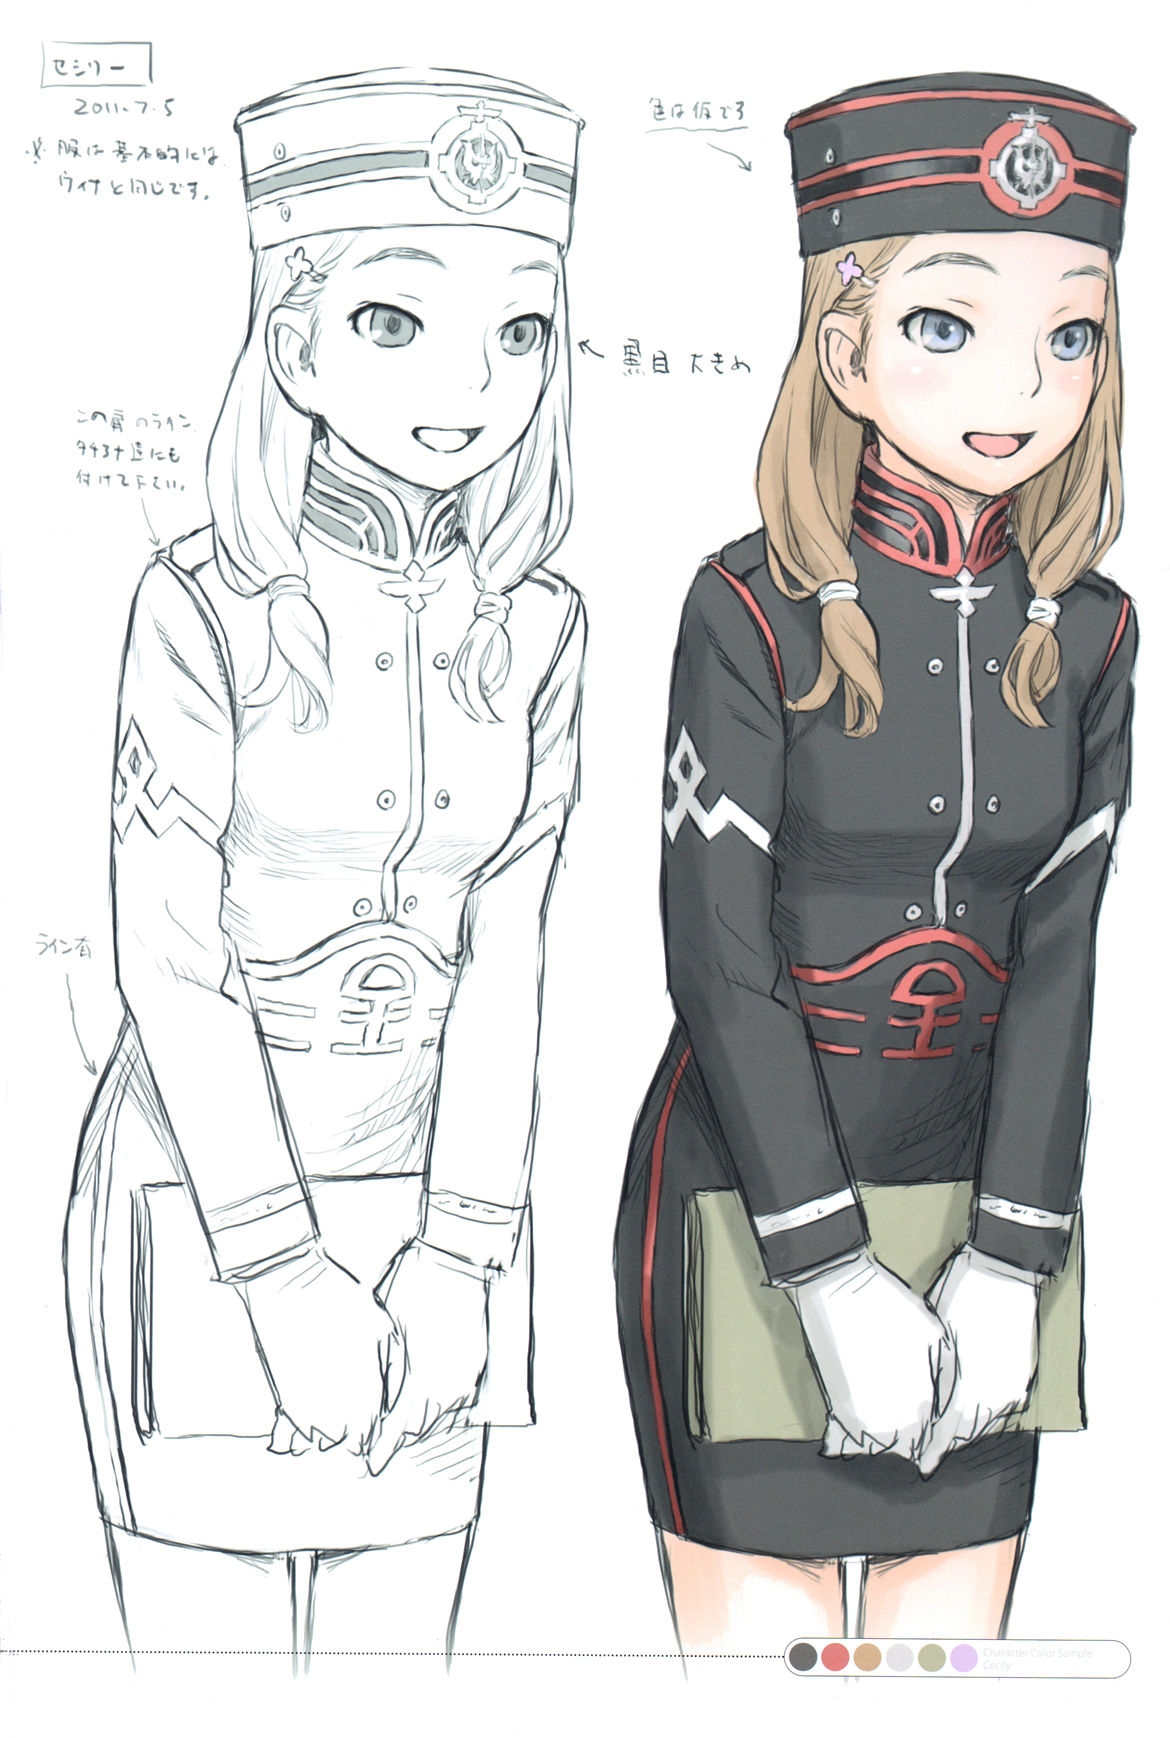 [Pasta's Estab (Range Murata)] Linkage - Last Exile ~ Fam, The Silver Wing - Character Filegraphy 02 3